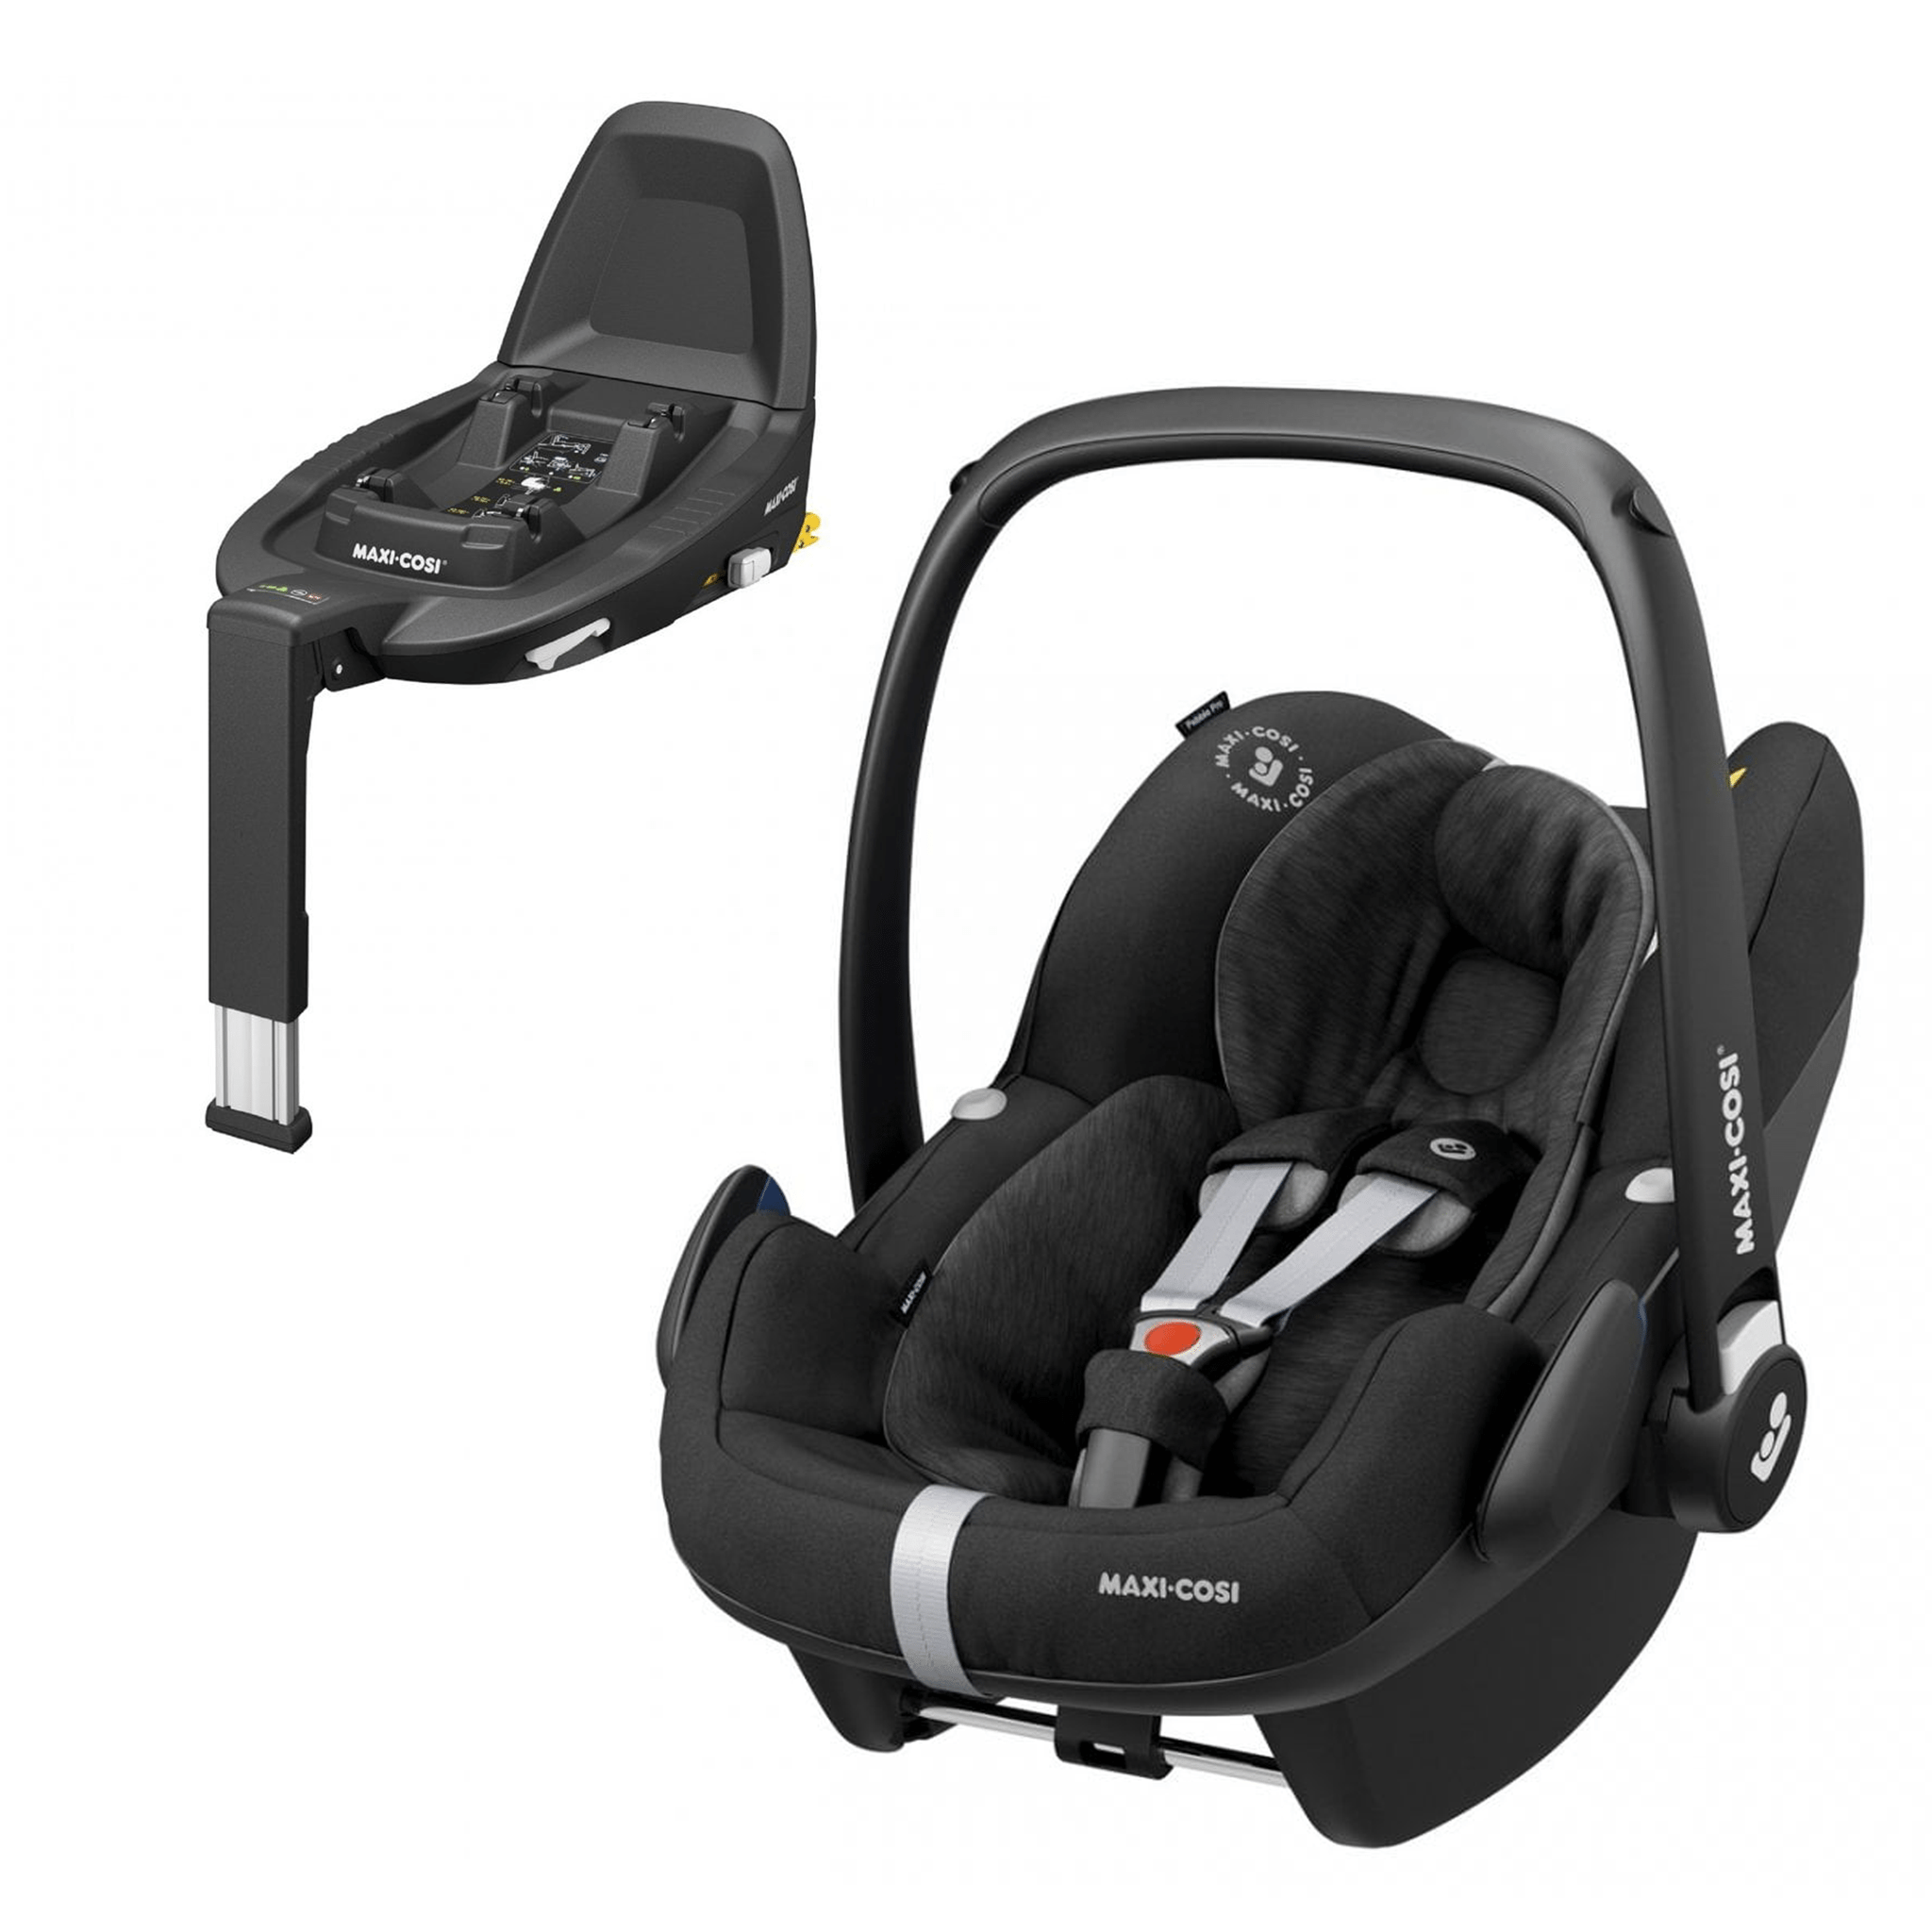 Baby & Child Car Seats & Accessories | Baby&Co